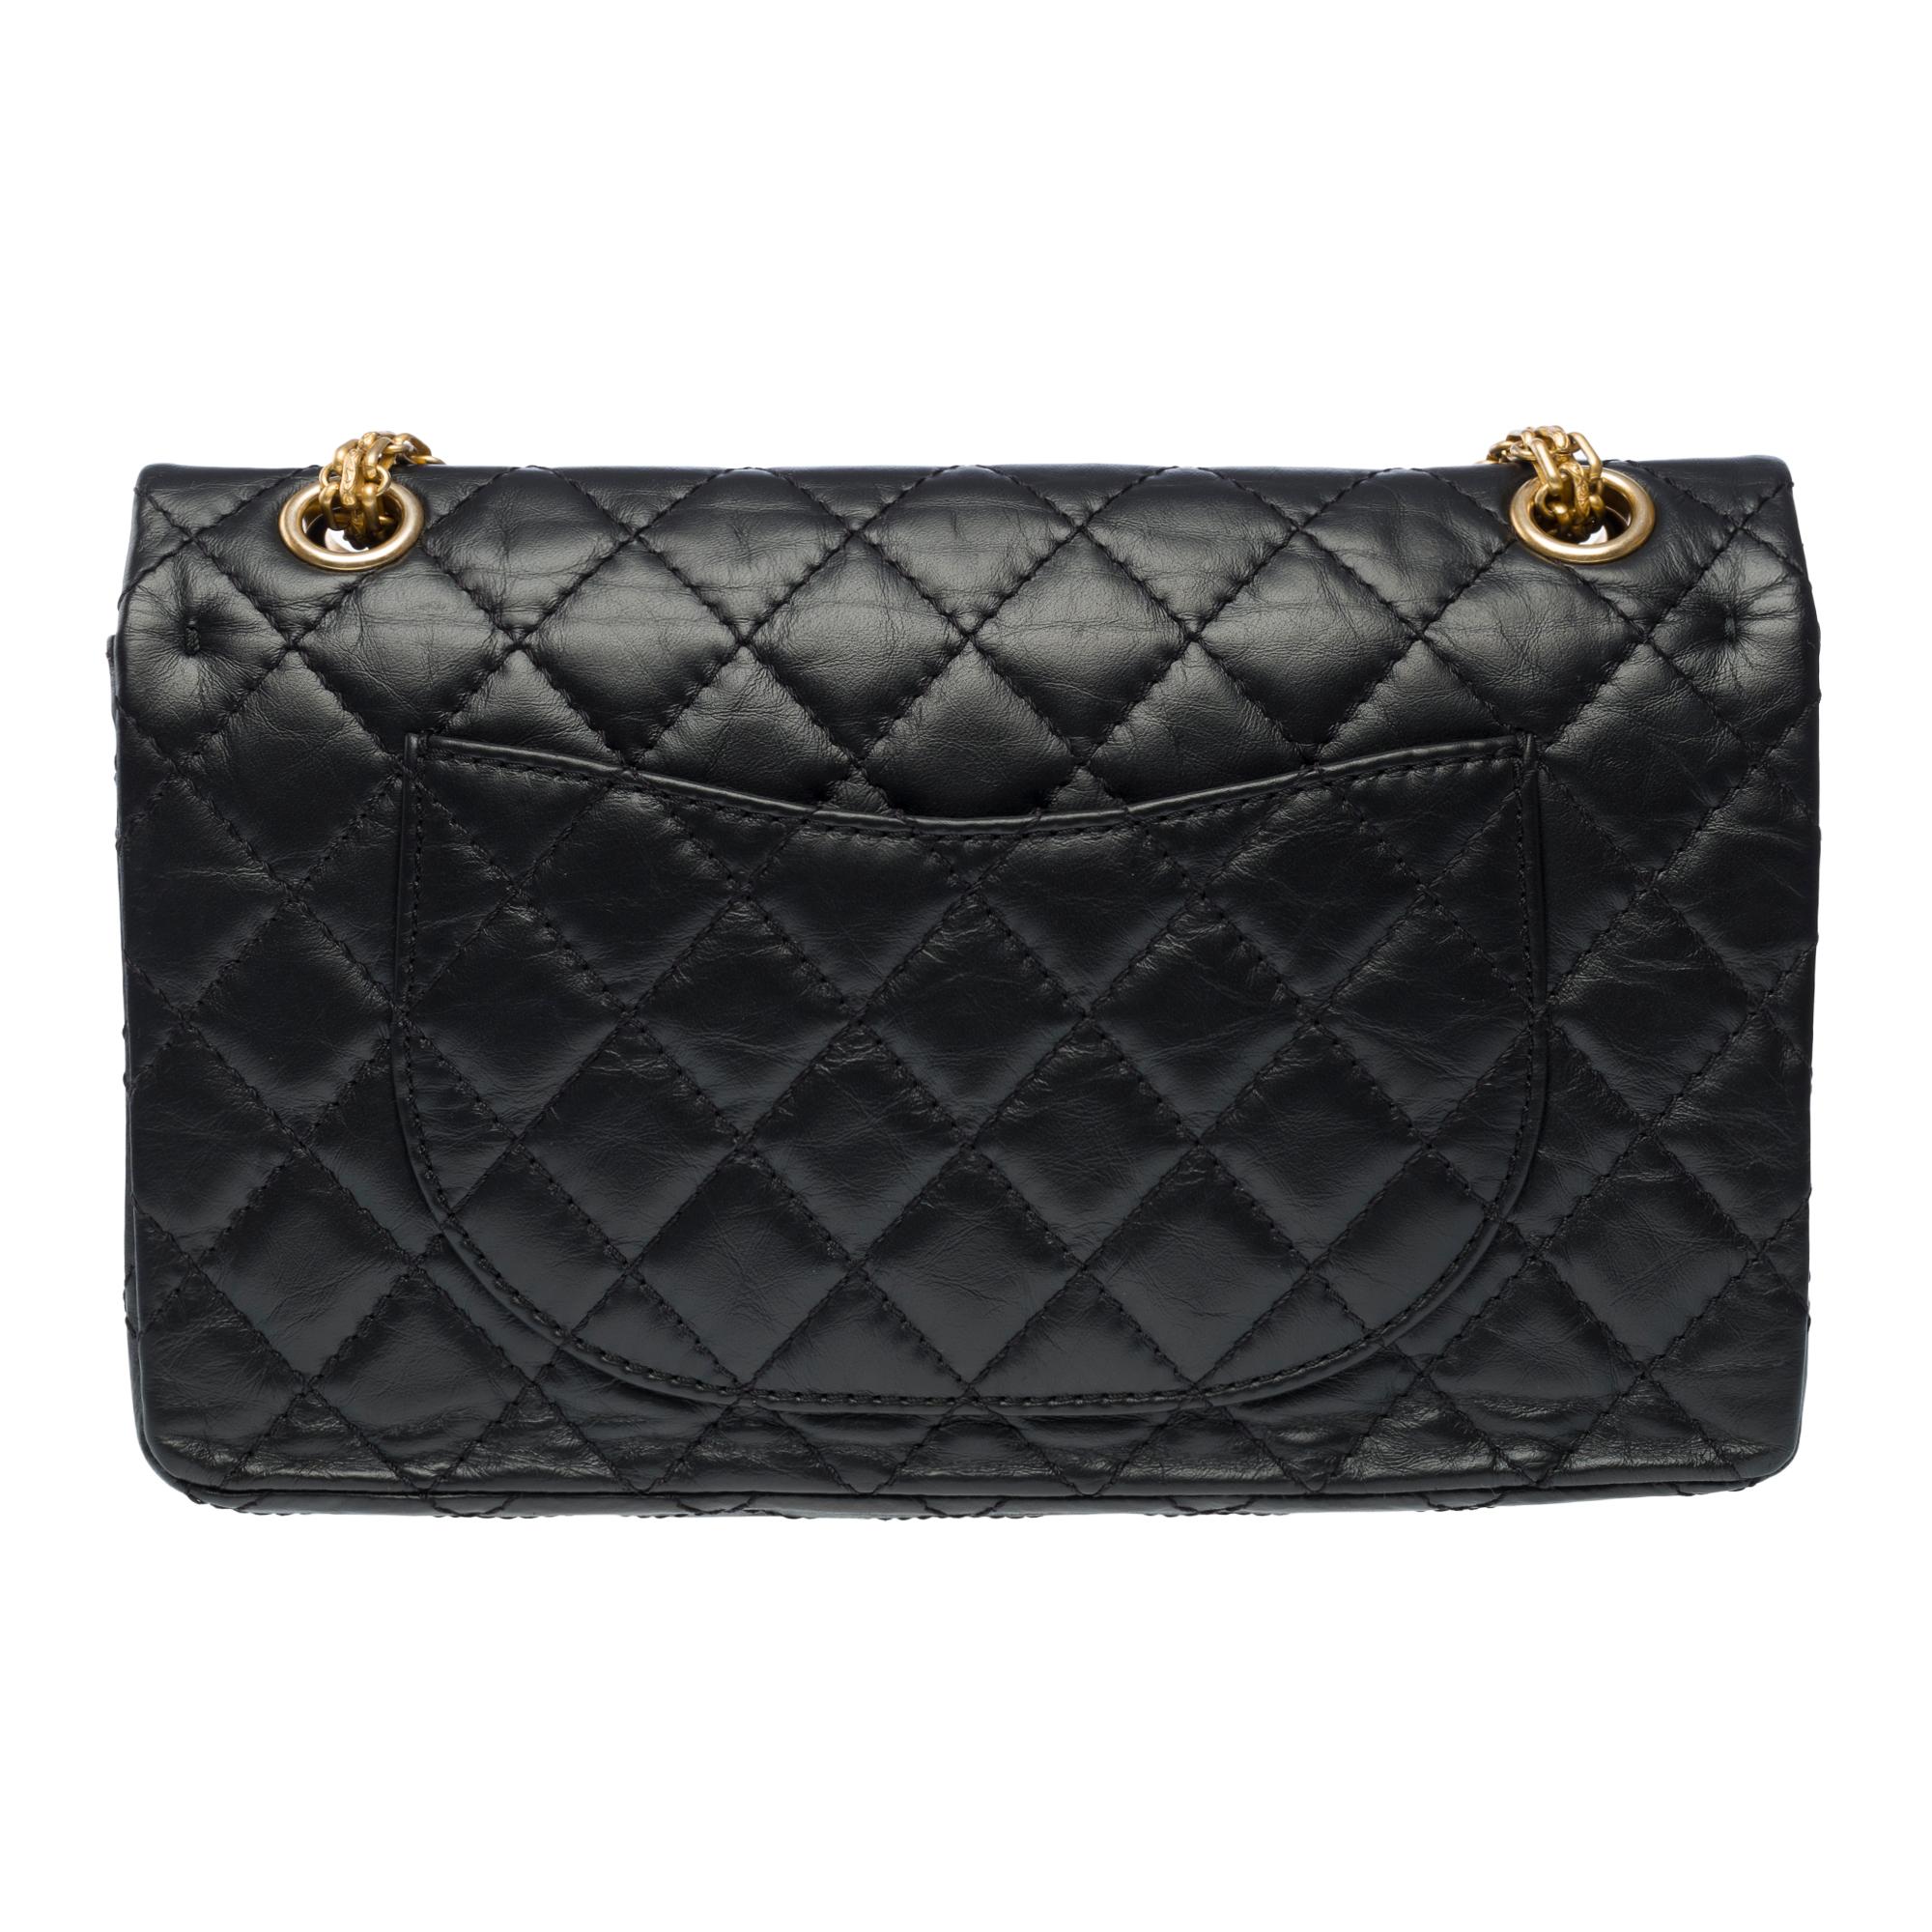 Women's Lucky Charms 2.55 Chanel double flap shoulder bag in black quilted leather, AGHW For Sale